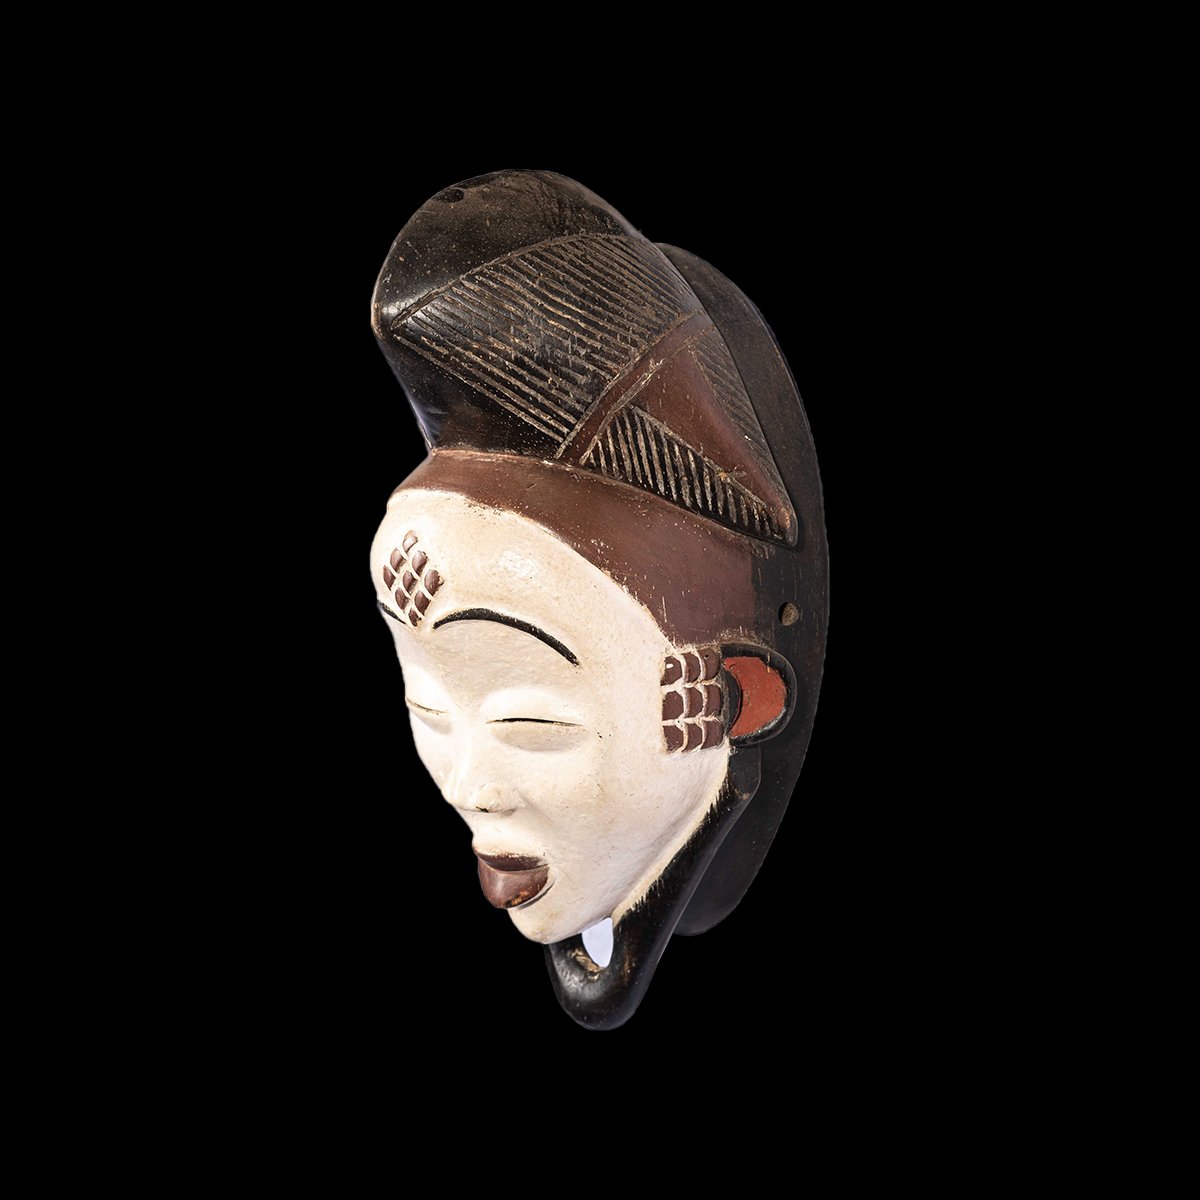 Punu Mask - Authentic African handicrafts | Clothing, bags, painting, toys & more - CULTURE HUB by Muthoni Unchained